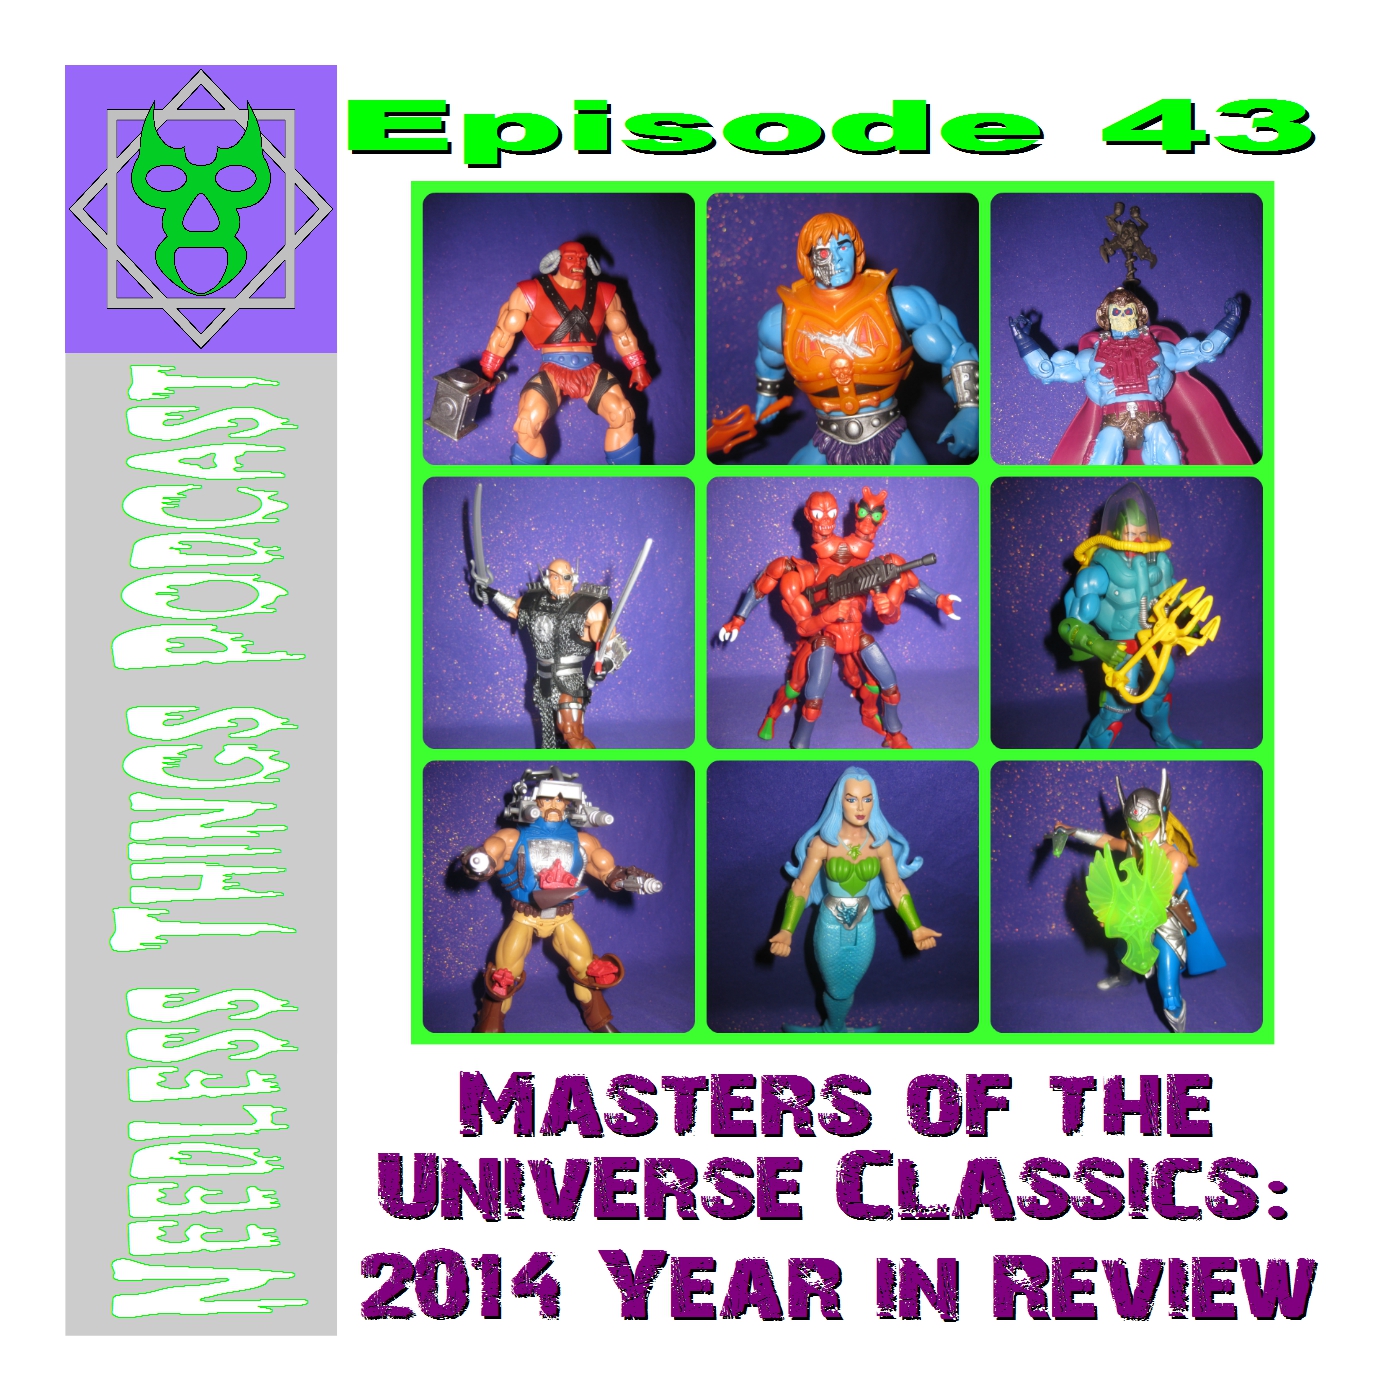 Needless Things Podcast 43 -  Masters of the Universe Classics:  2014 Year in Review